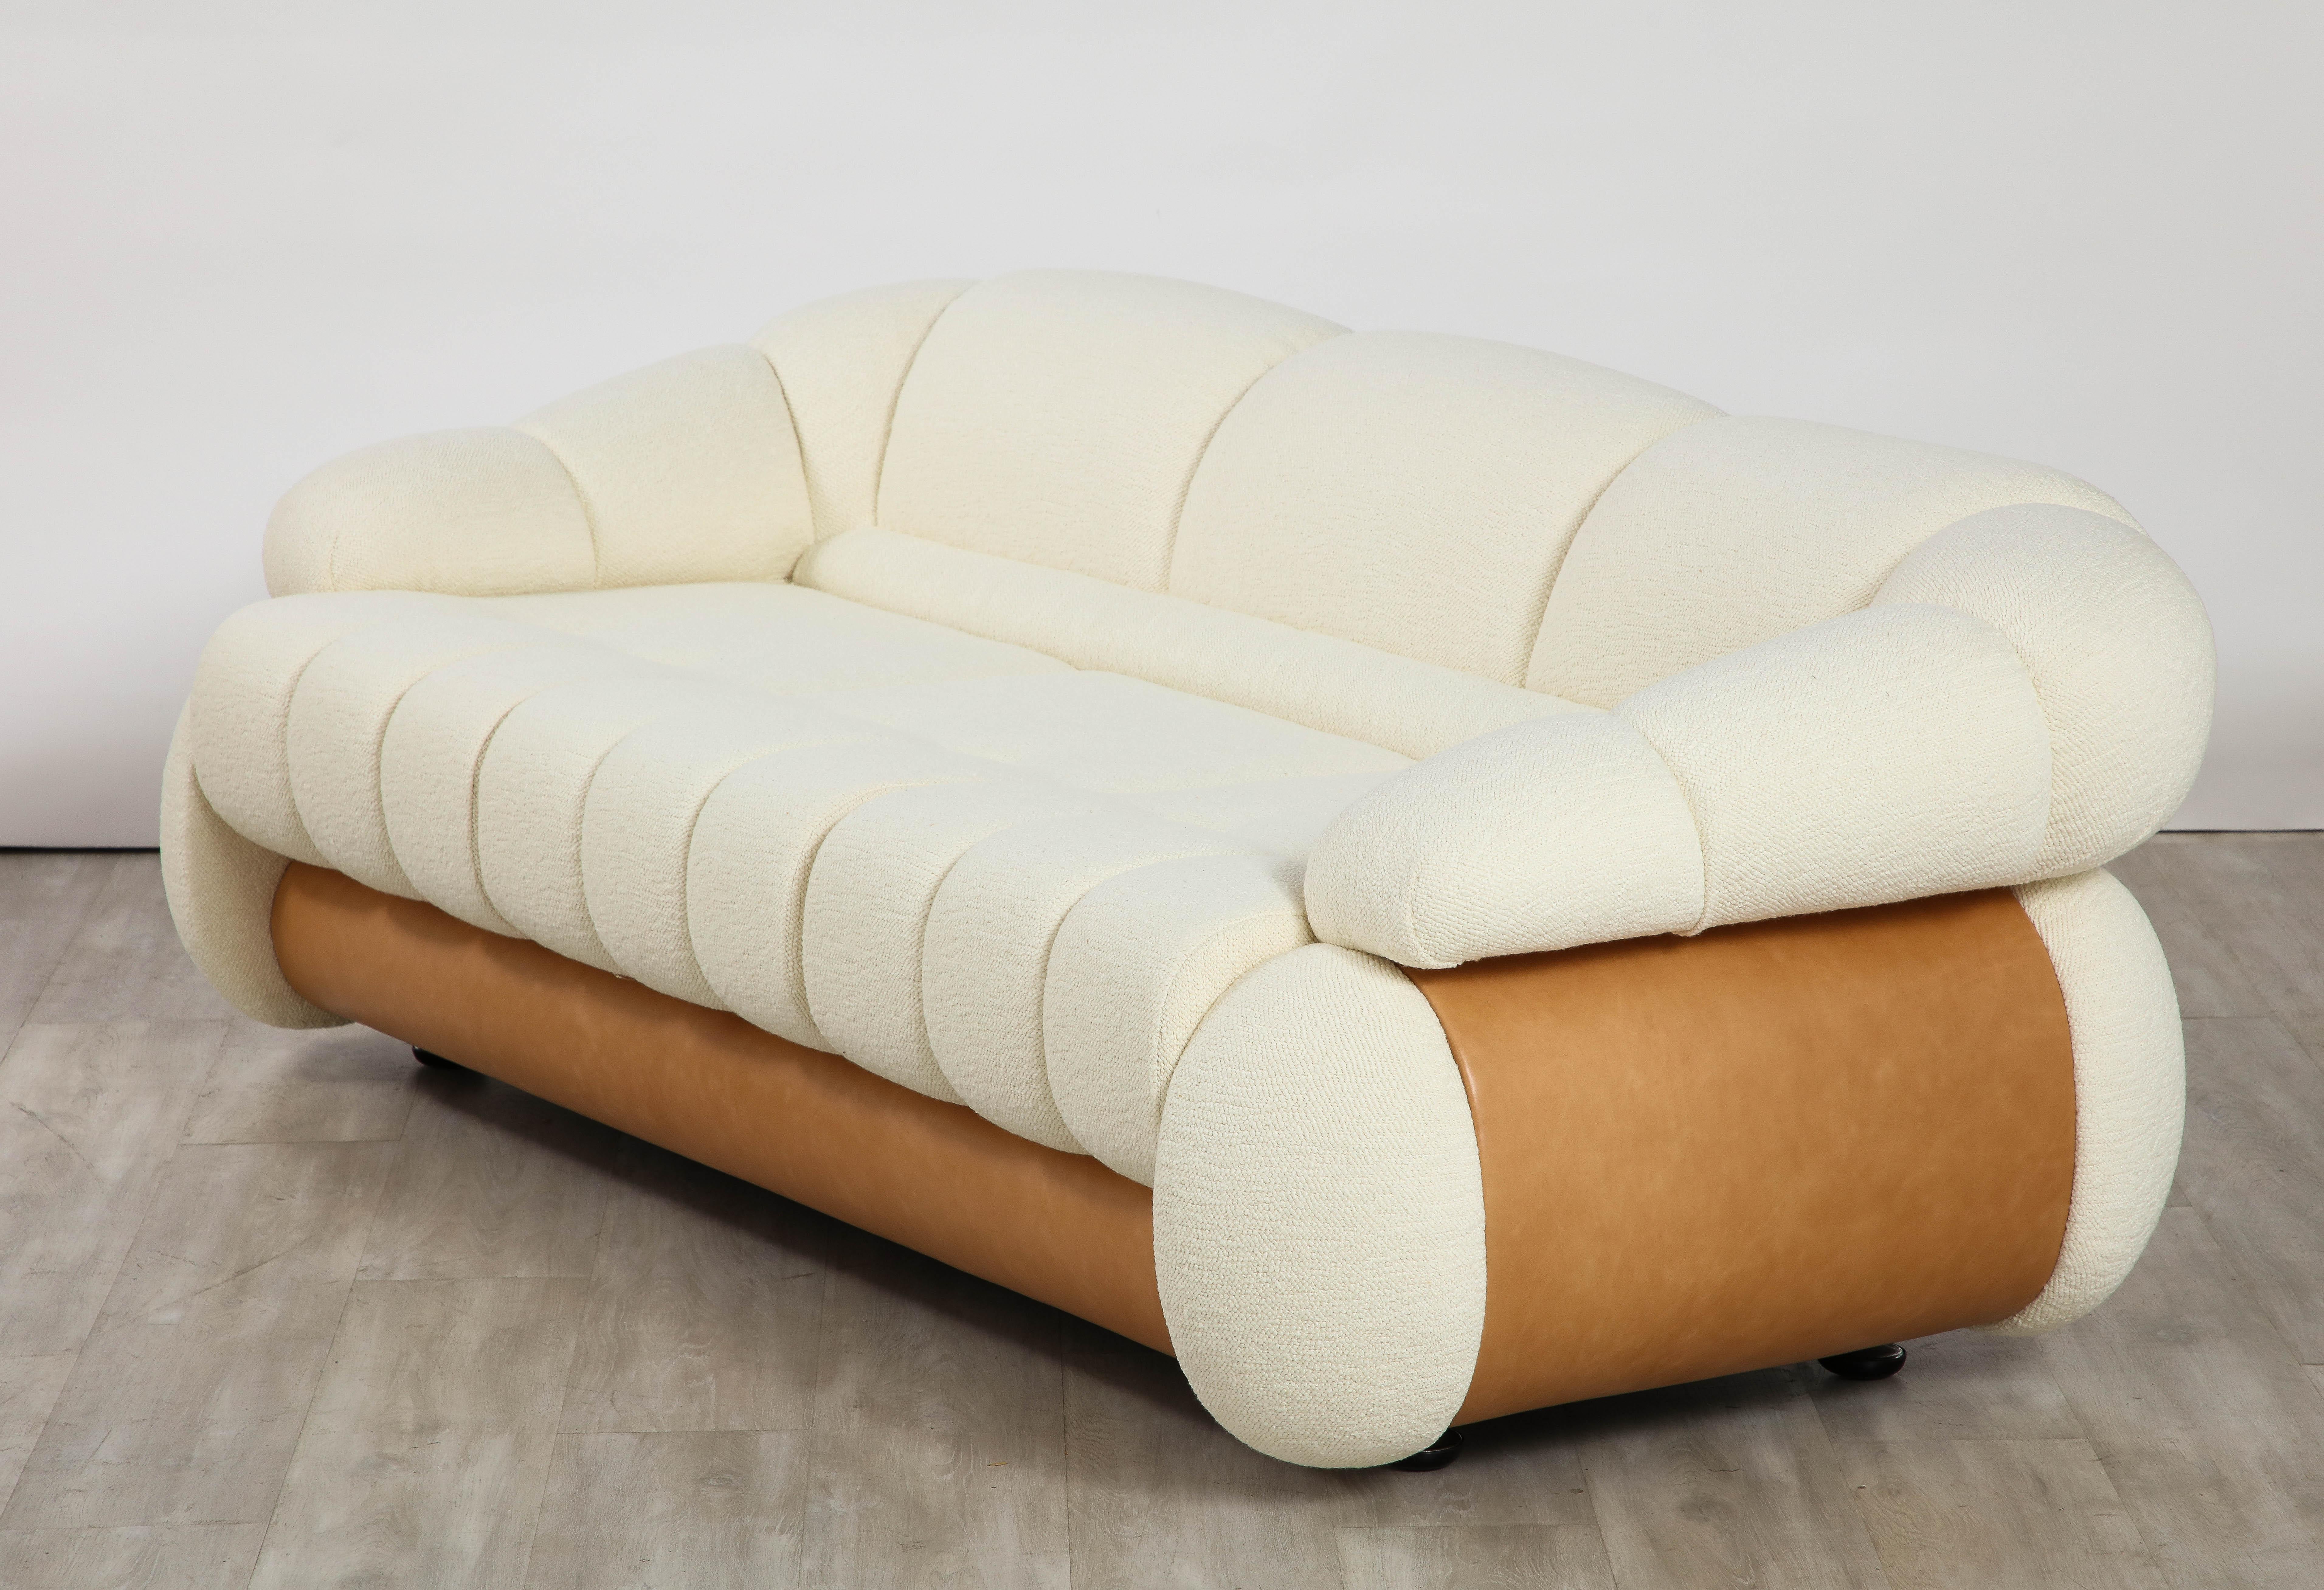 Adriano Piazzesi Italian 1970's Channel Tufted Sofa For Sale 8